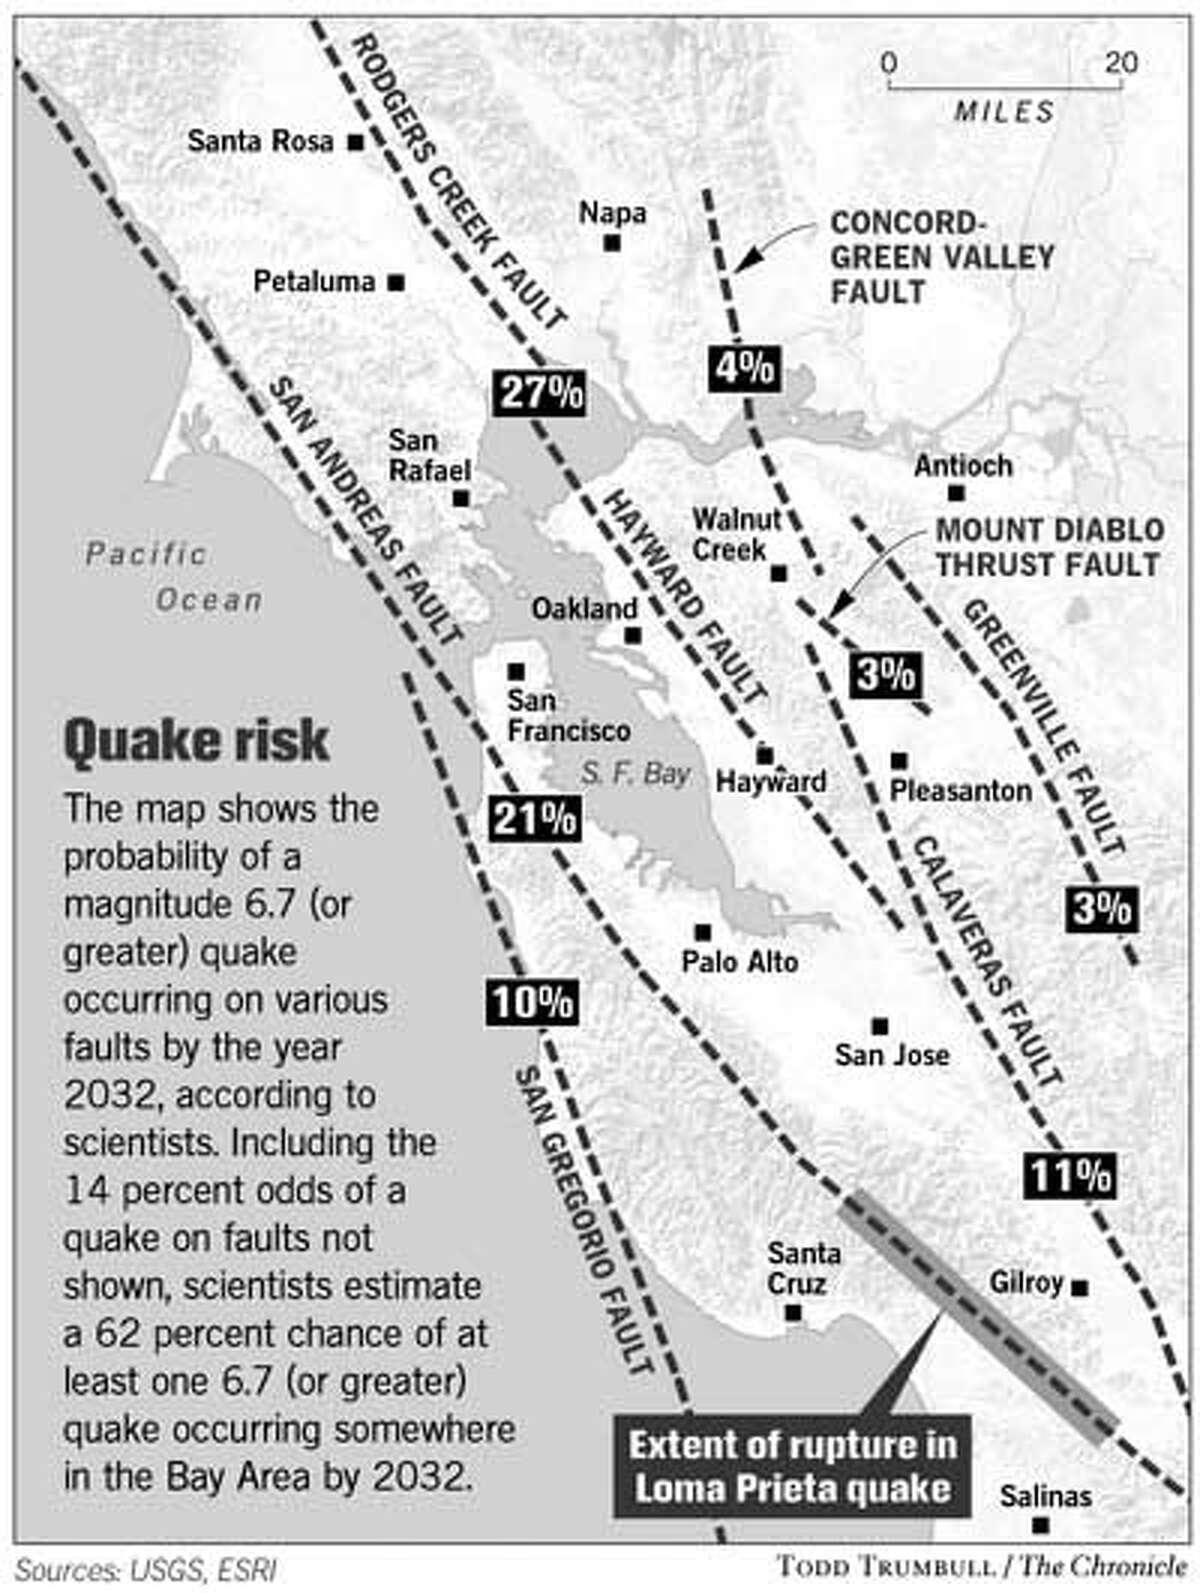 Quake Risk. Chronicle graphic by Todd Trumbull